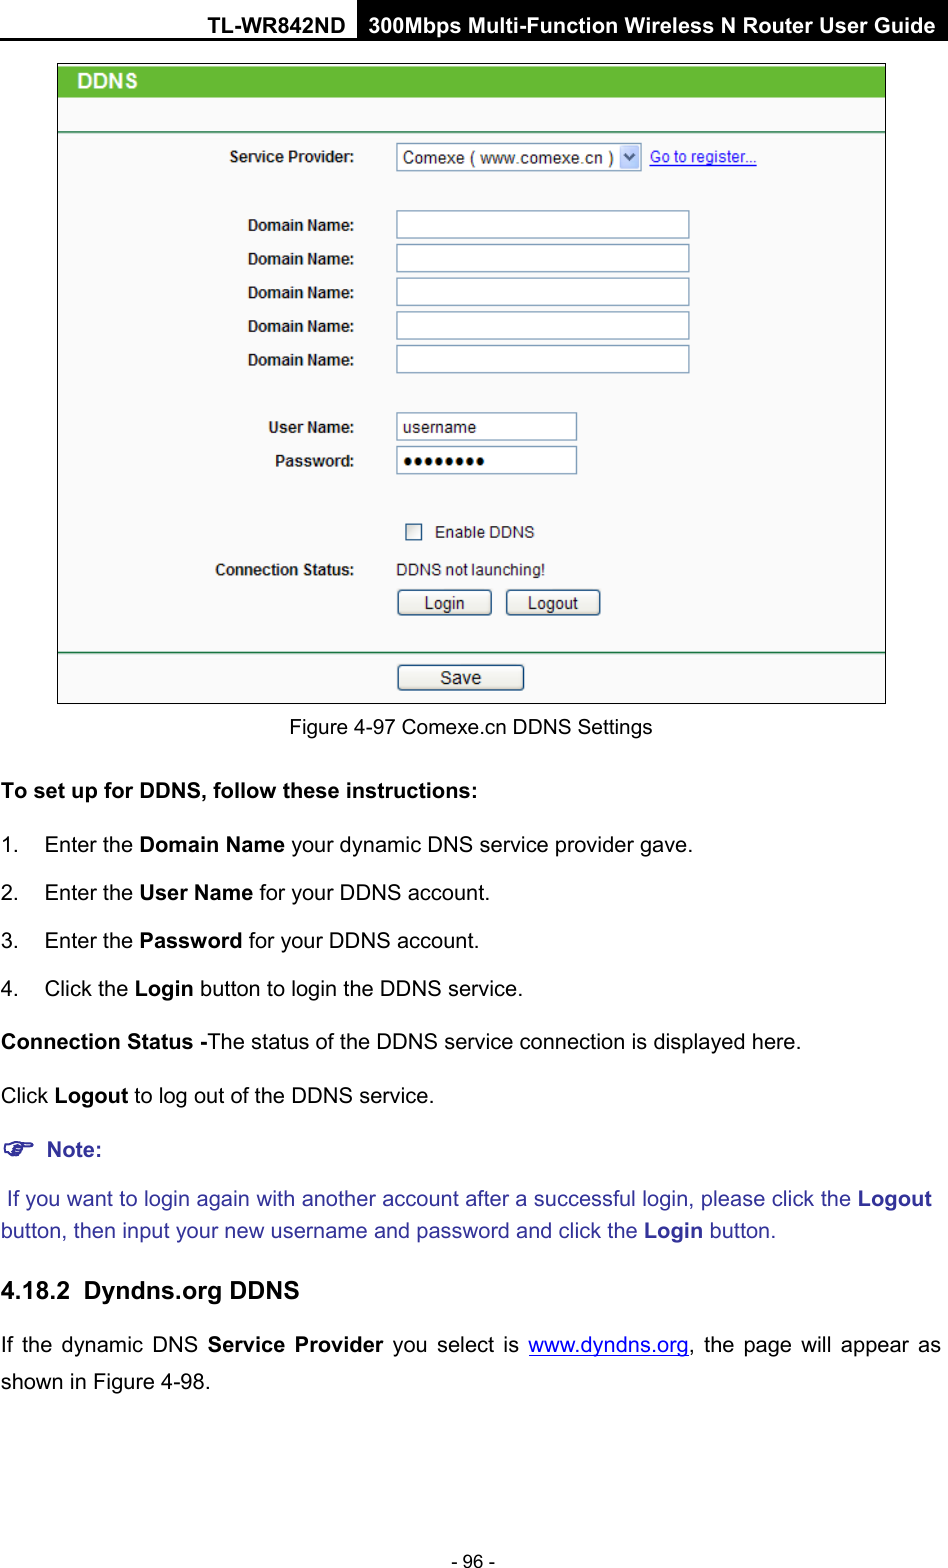 TL-WR842ND 300Mbps Multi-Function Wireless N Router User Guide  - 96 -  Figure 4-97 Comexe.cn DDNS Settings To set up for DDNS, follow these instructions: 1. Enter the Domain Name your dynamic DNS service provider gave.   2. Enter the User Name for your DDNS account.   3. Enter the Password for your DDNS account.   4. Click the Login button to login the DDNS service.   Connection Status -The status of the DDNS service connection is displayed here. Click Logout to log out of the DDNS service.    Note:  If you want to login again with another account after a successful login, please click the Logout button, then input your new username and password and click the Login button. 4.18.2 Dyndns.org DDNS If  the  dynamic DNS Service Provider you select is www.dyndns.org, the page will appear as shown in Figure 4-98. 